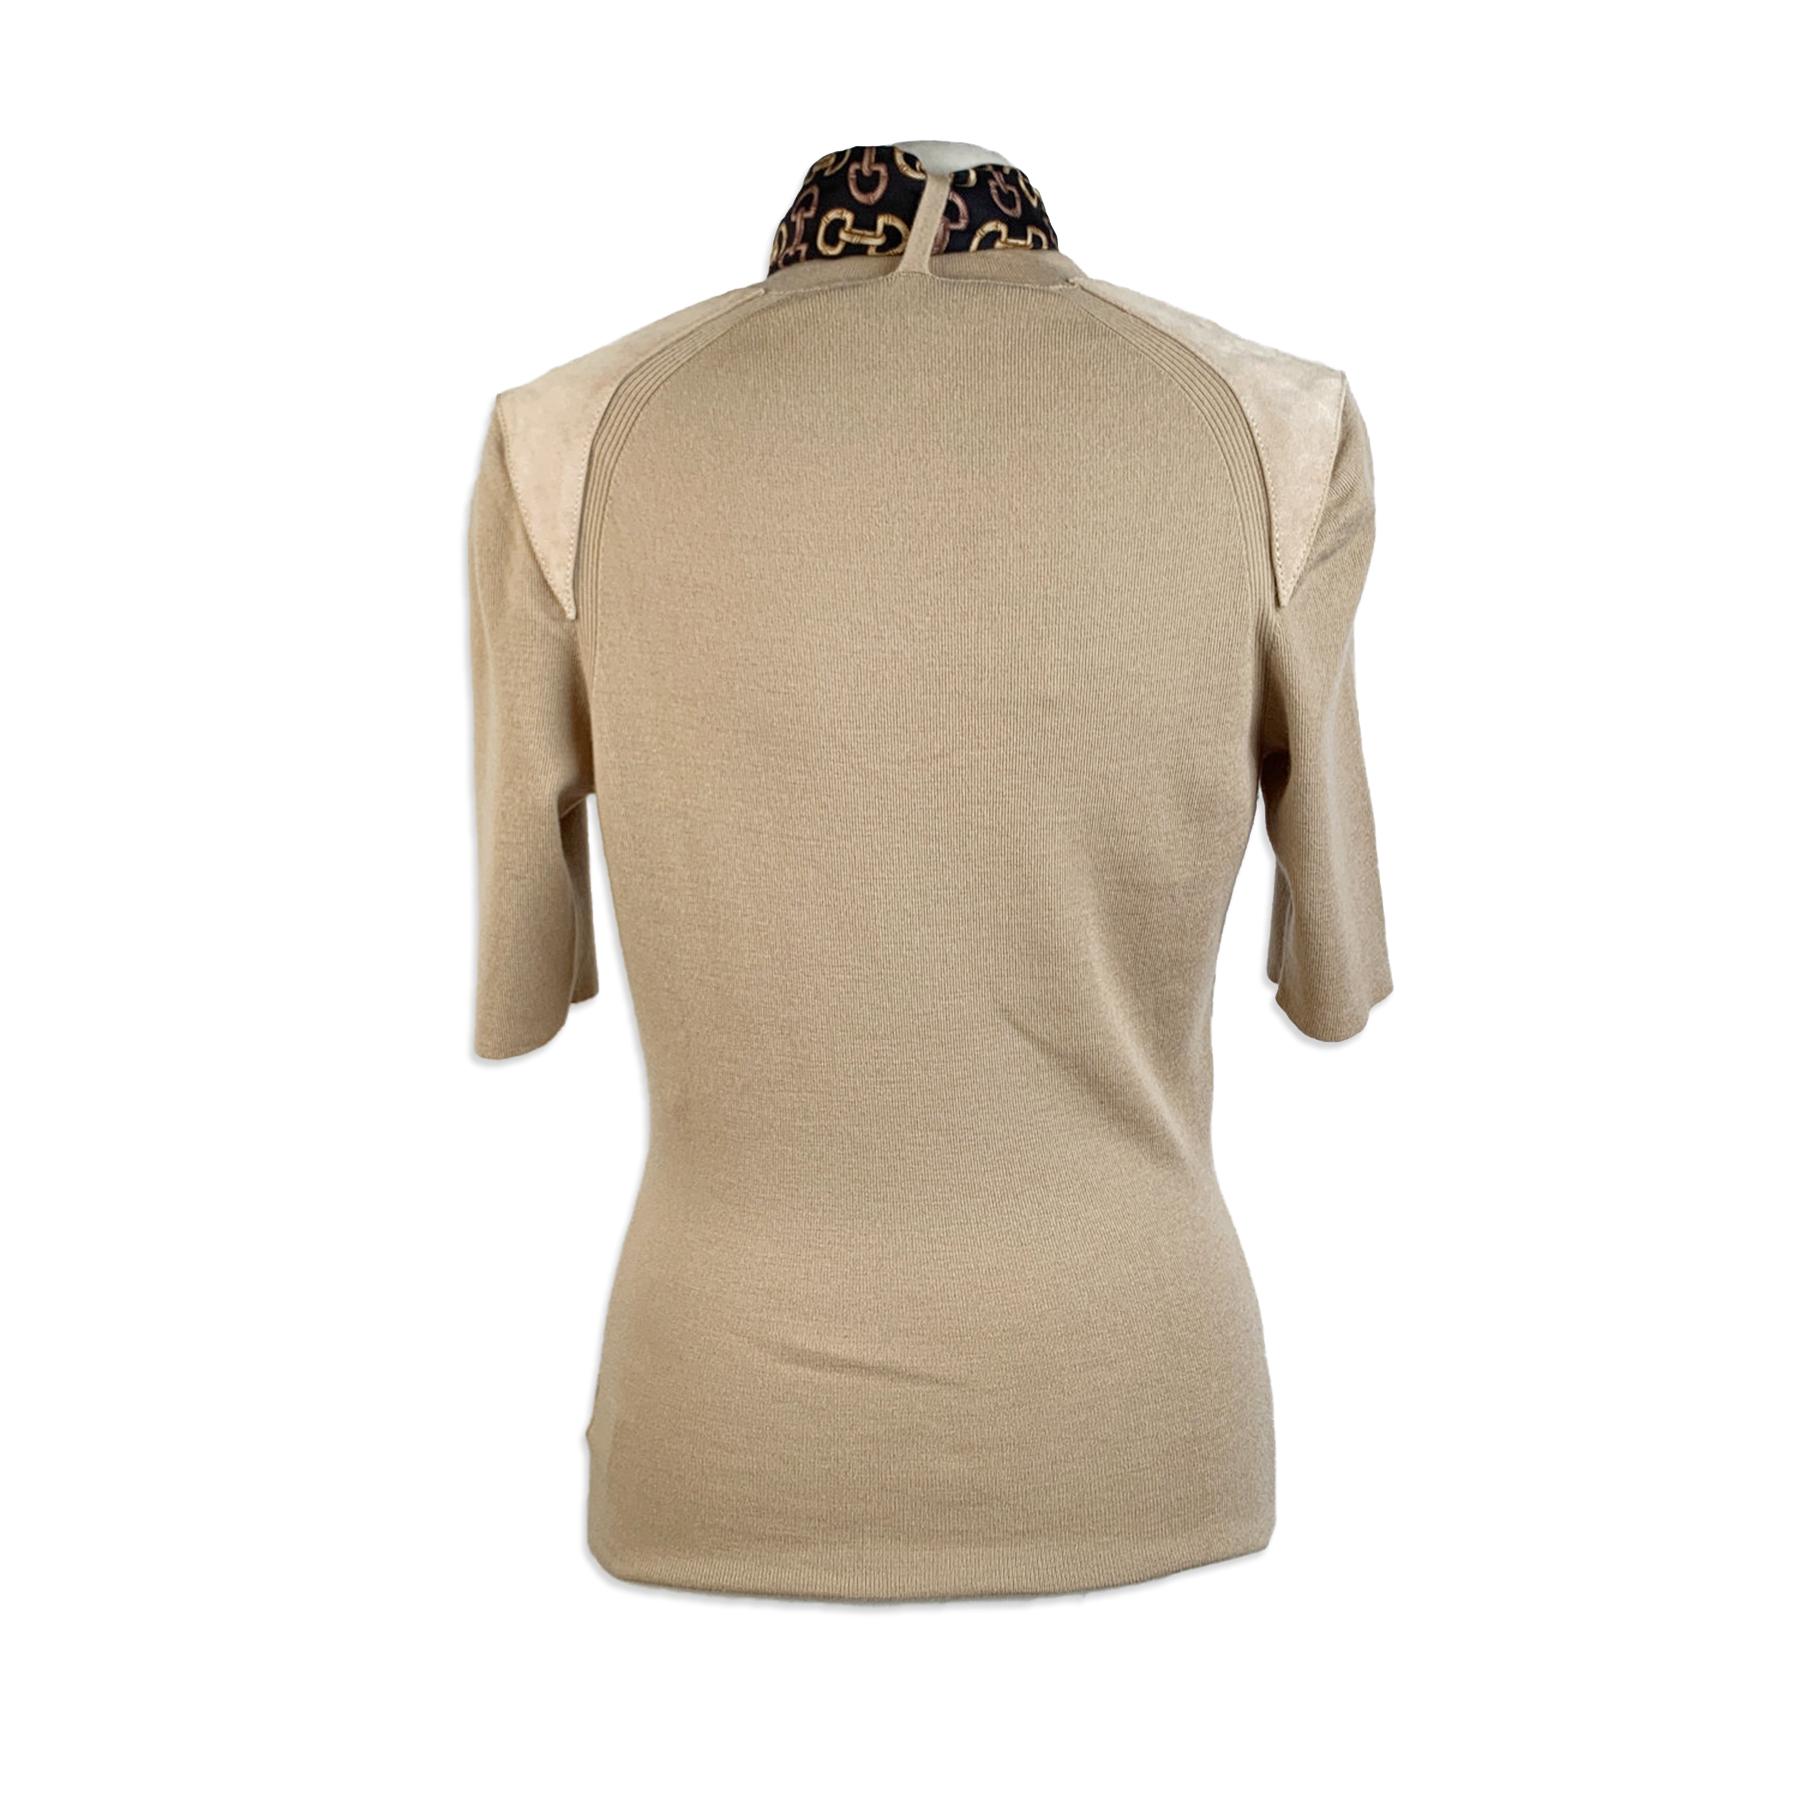 Women's Gucci Beige Cashmere Short Sleeve Jumper Top with Scarf Size S